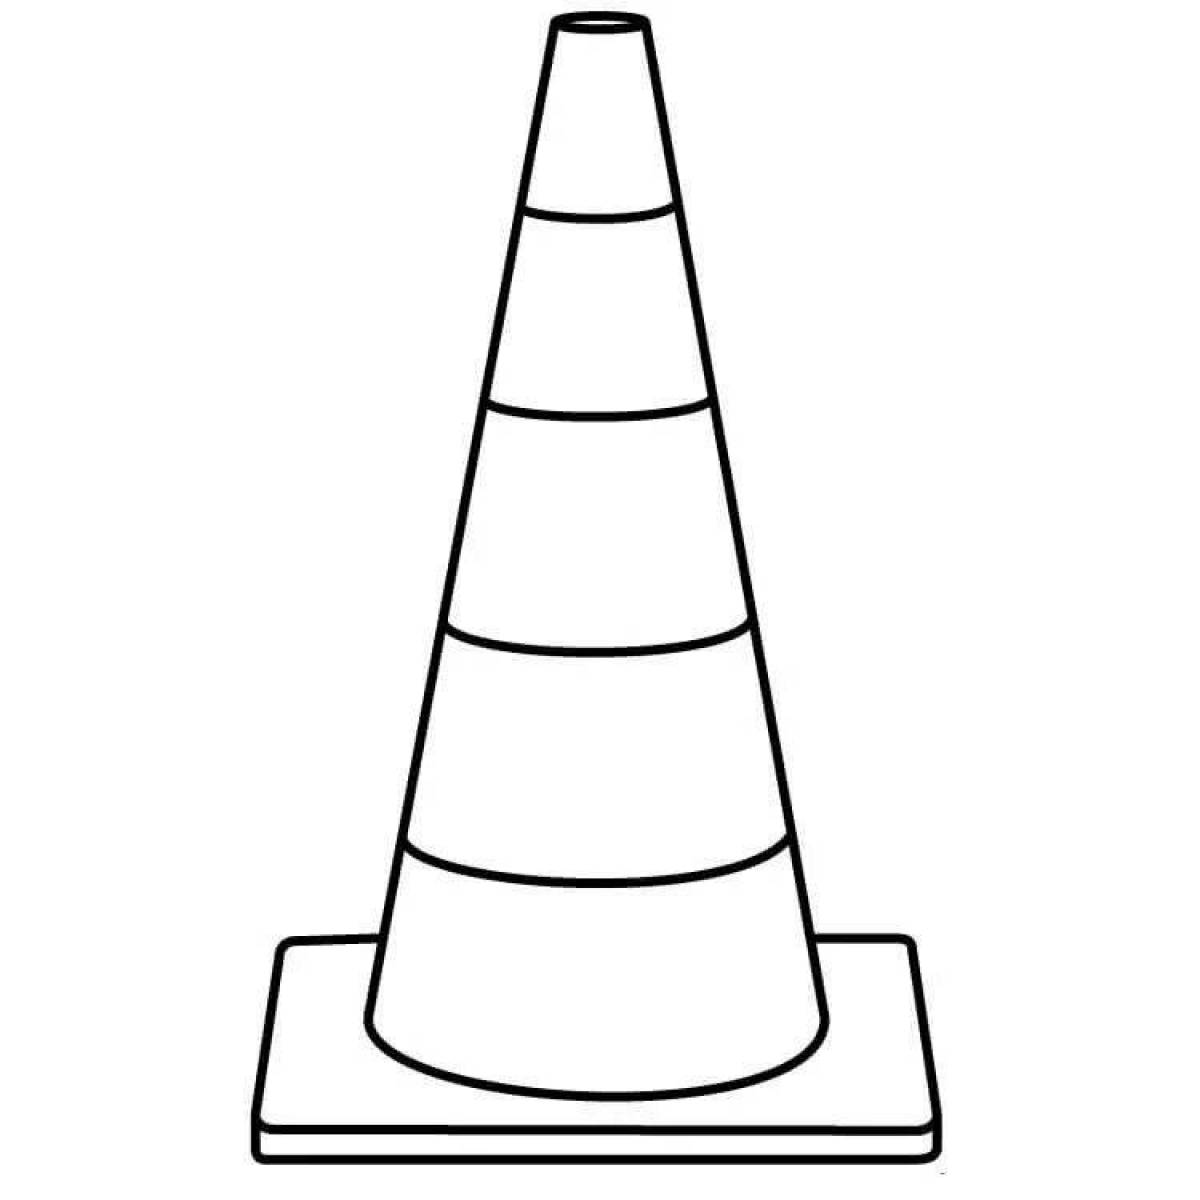 Great cone coloring page